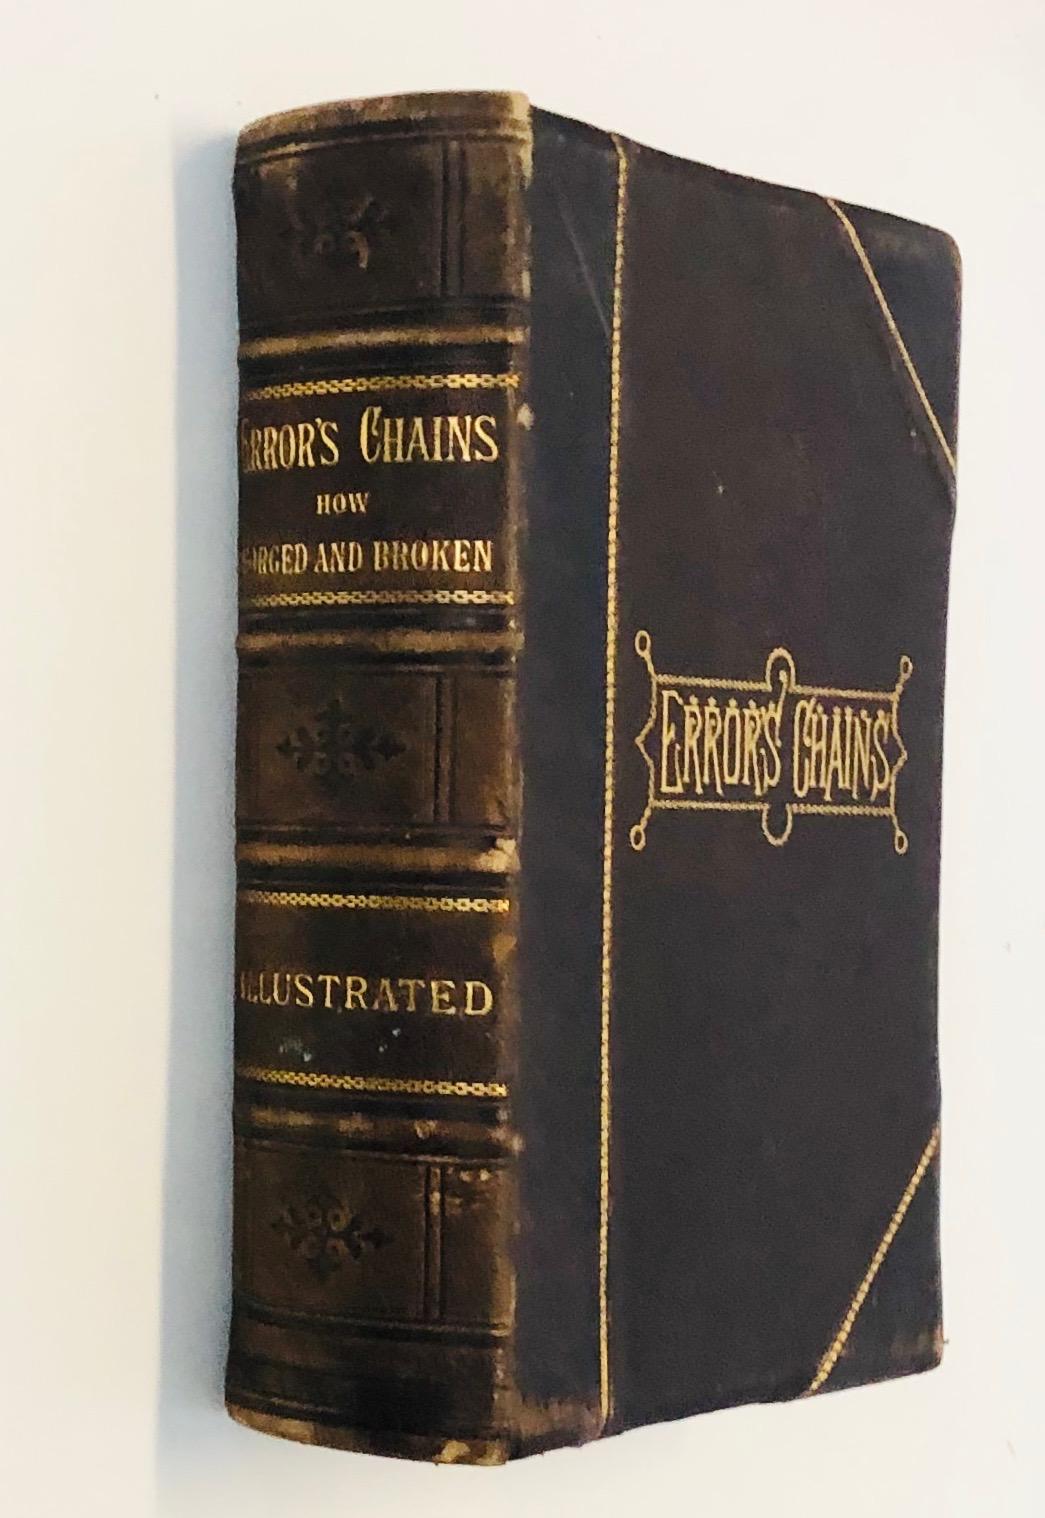 ERROR'S CHAINS: How Forged and Broken by Frank S. Dobbins (1883)